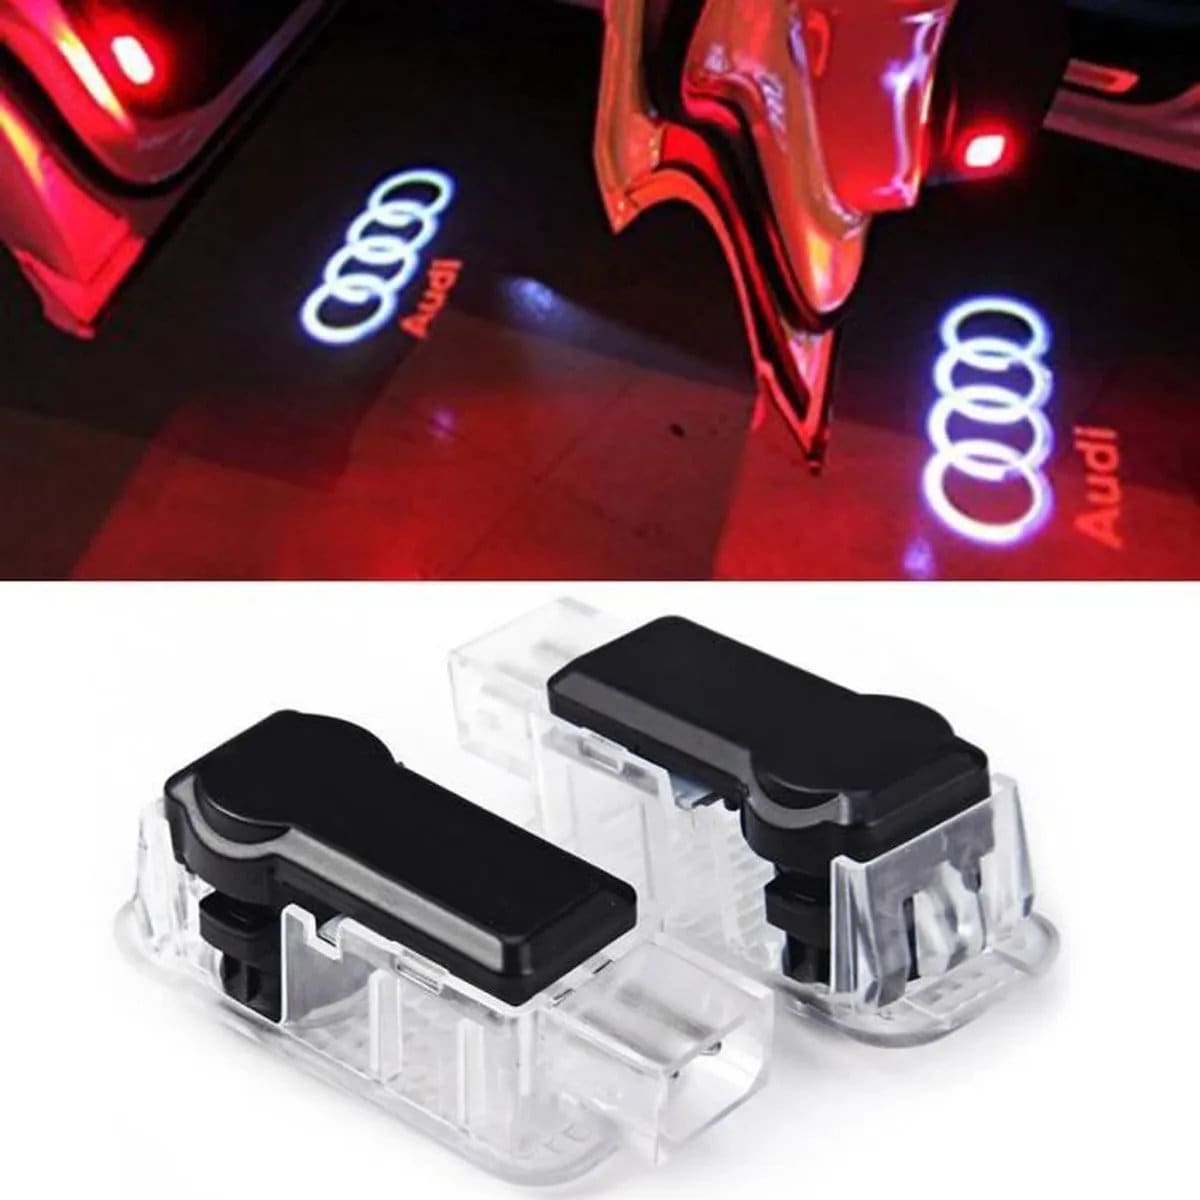 2pcs AUDI LED Projector Welcome Light for AUDI Car Door Projection